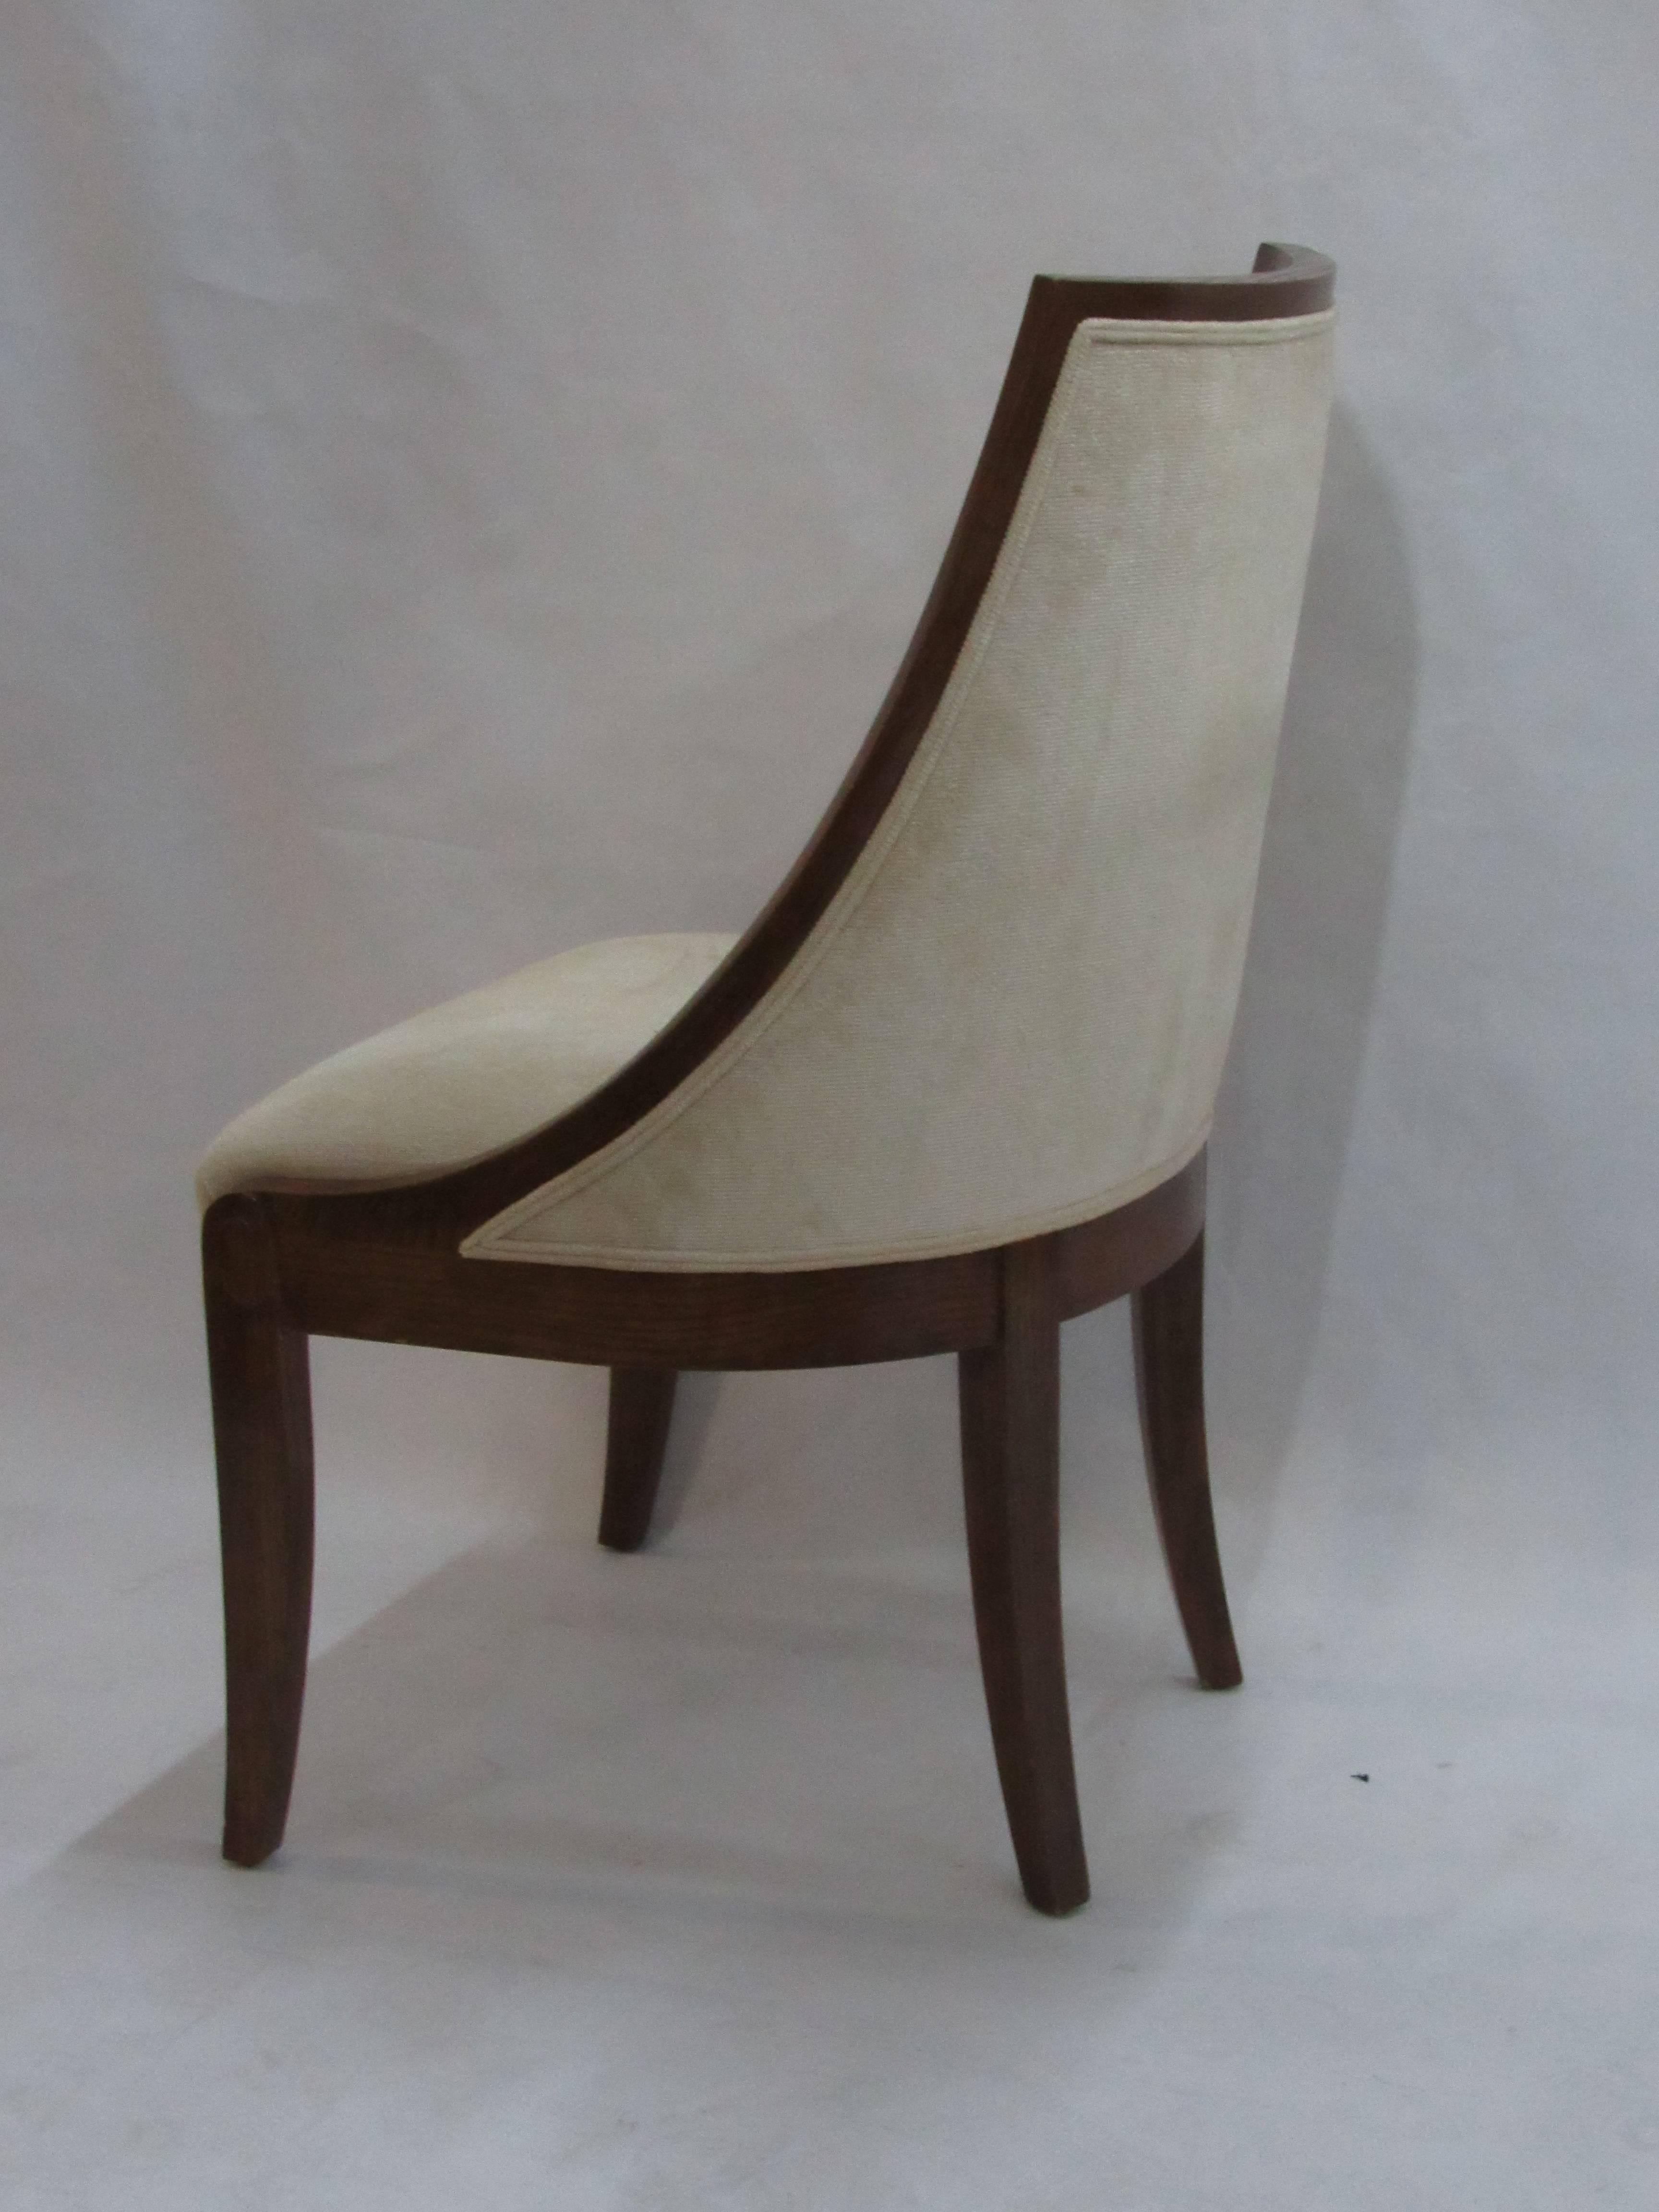 A custom contemporary chair in strie velvet. The Peter Marino designed oak frame is shaped in the style of a simple Directoire design with a clean scroll carving located at the top of the leg. Contemporary ram's chair created by J. Robert Scott for